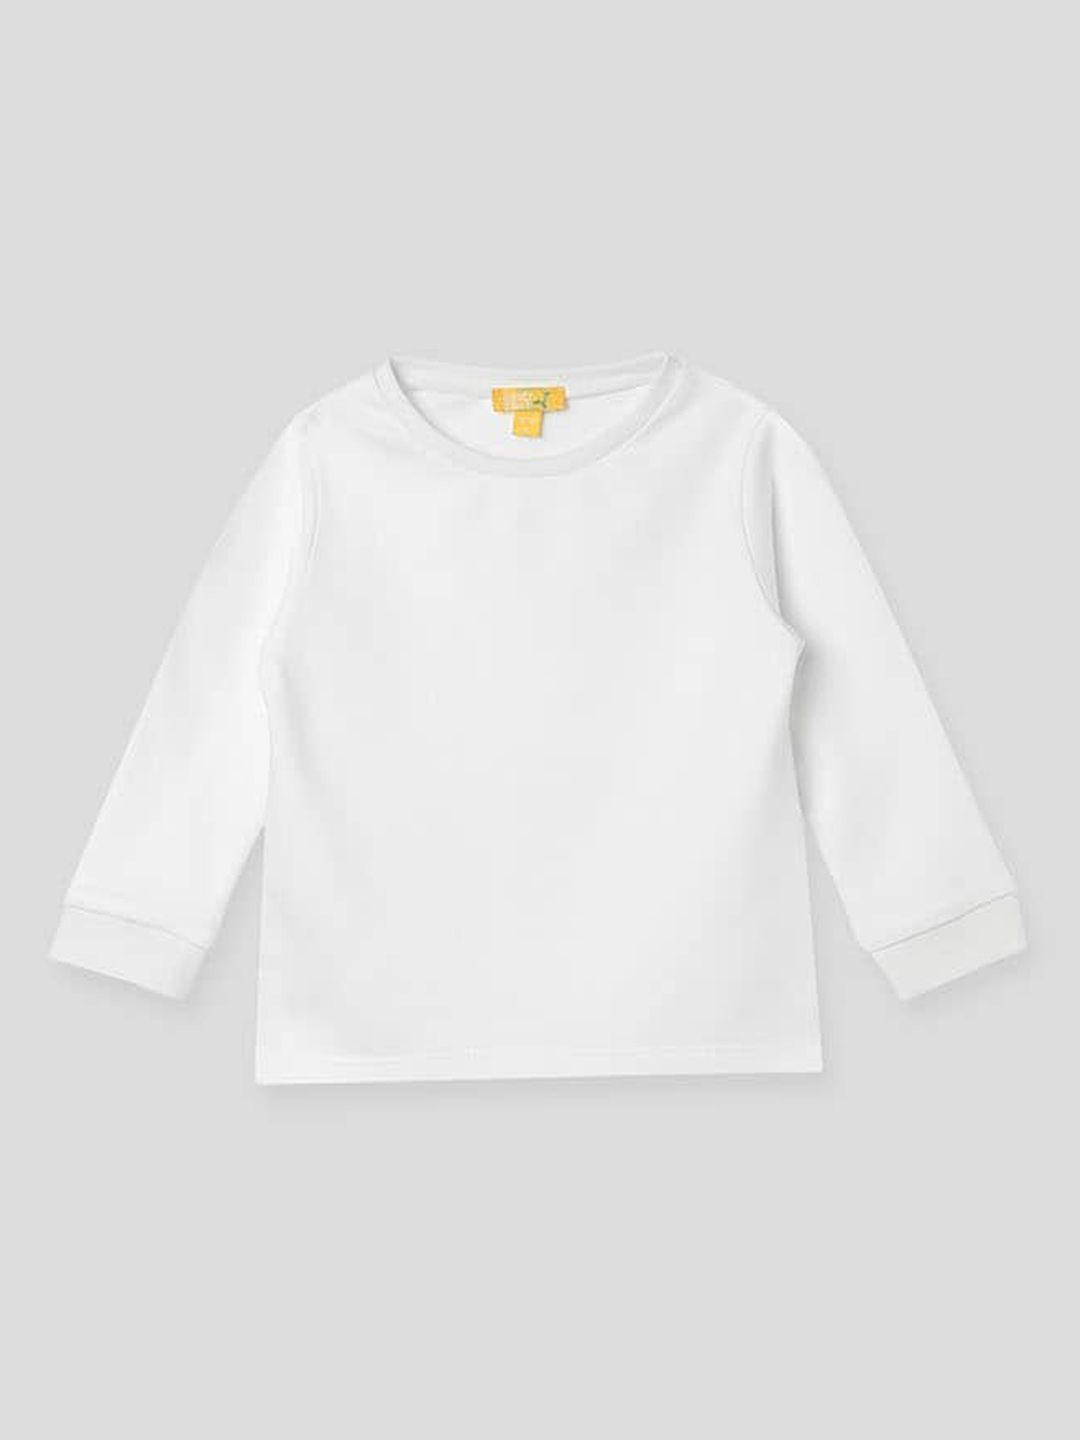 somersault kids round neck long sleeves pure cotton thermal set